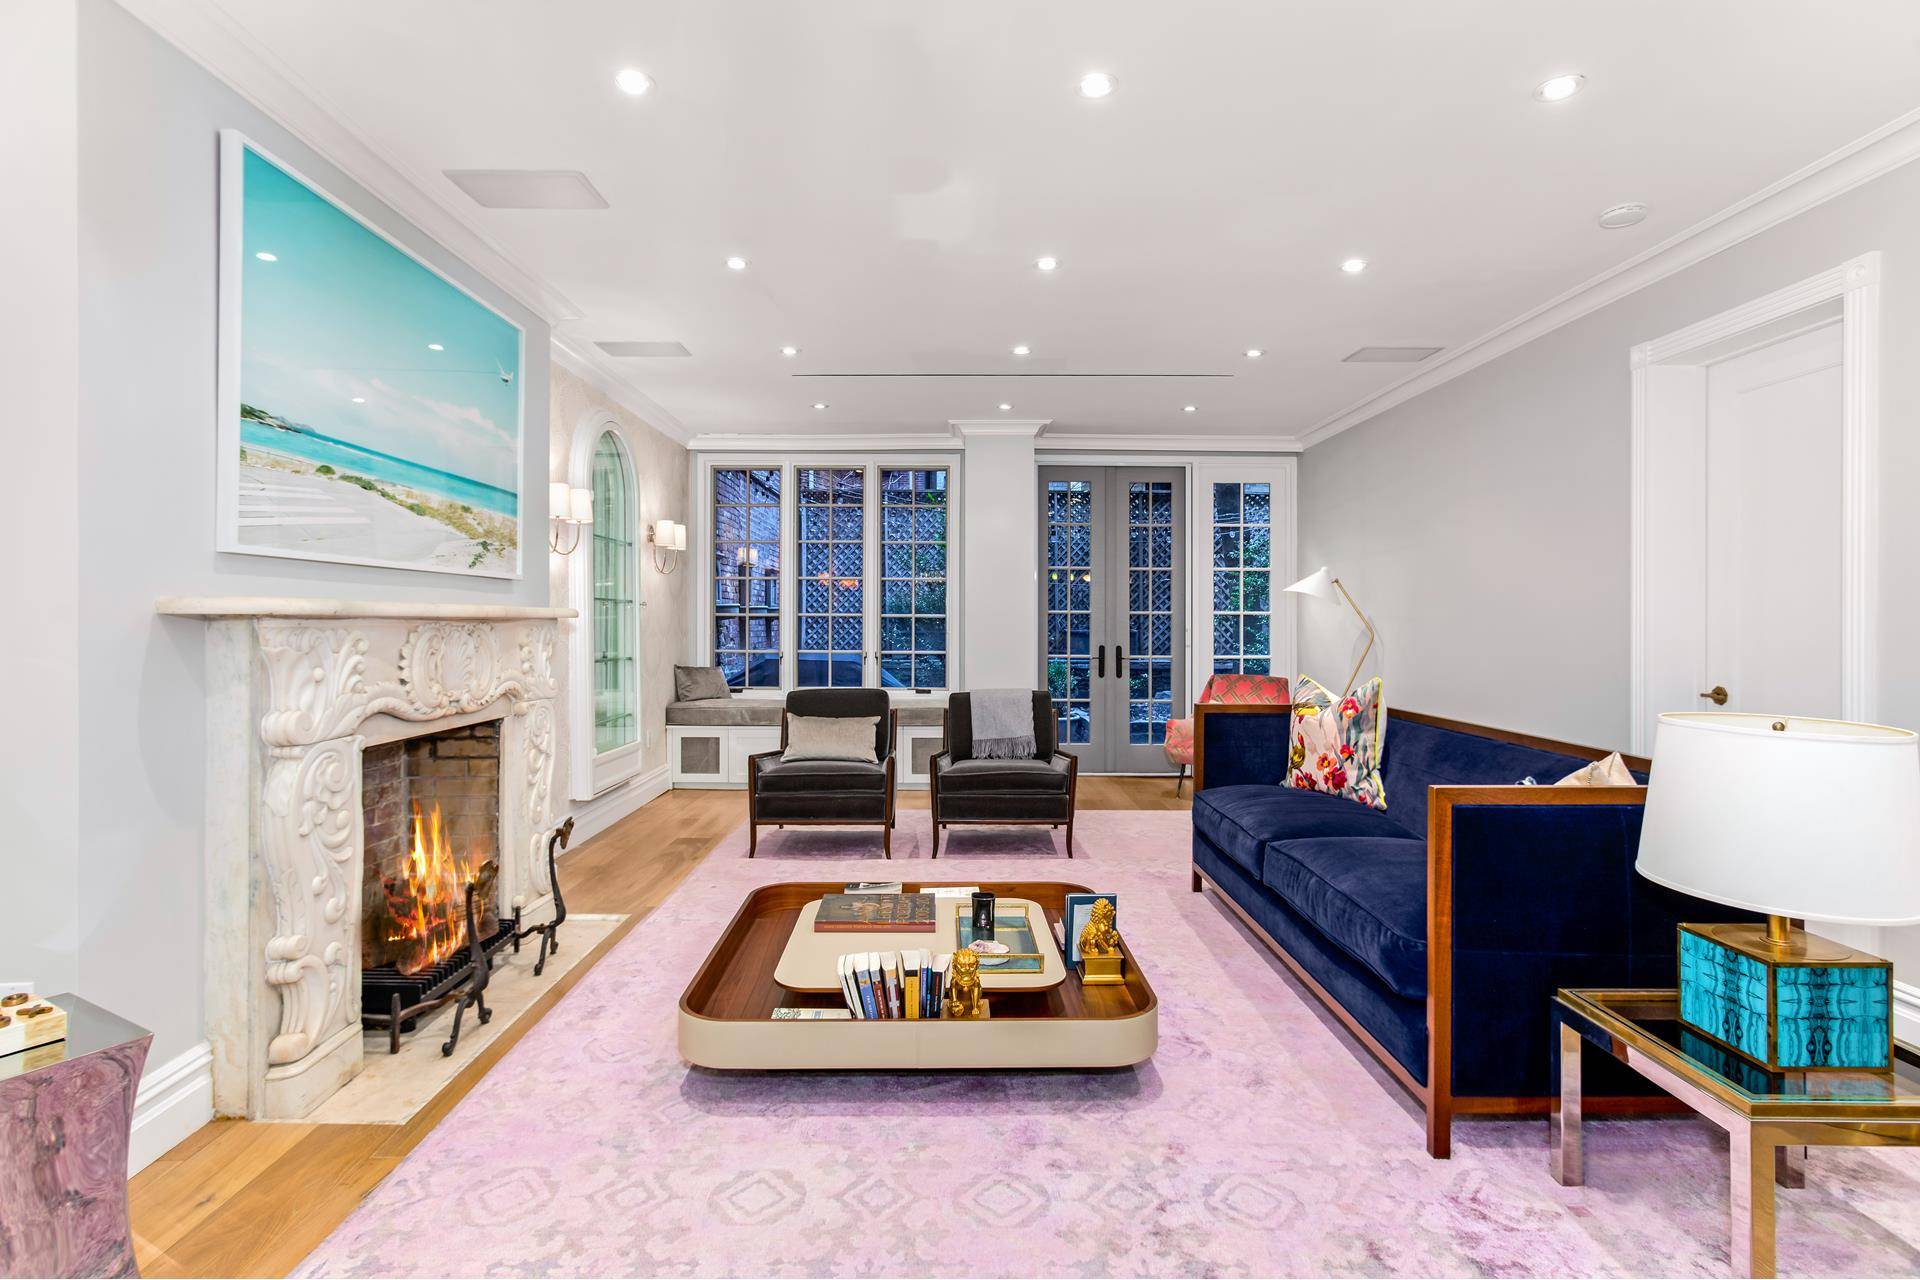 A one of a kind opportunity to own a special slice of heaven AND history in NYC, with a coveted key to Gramercy Park and a private backyard garden haven, ...